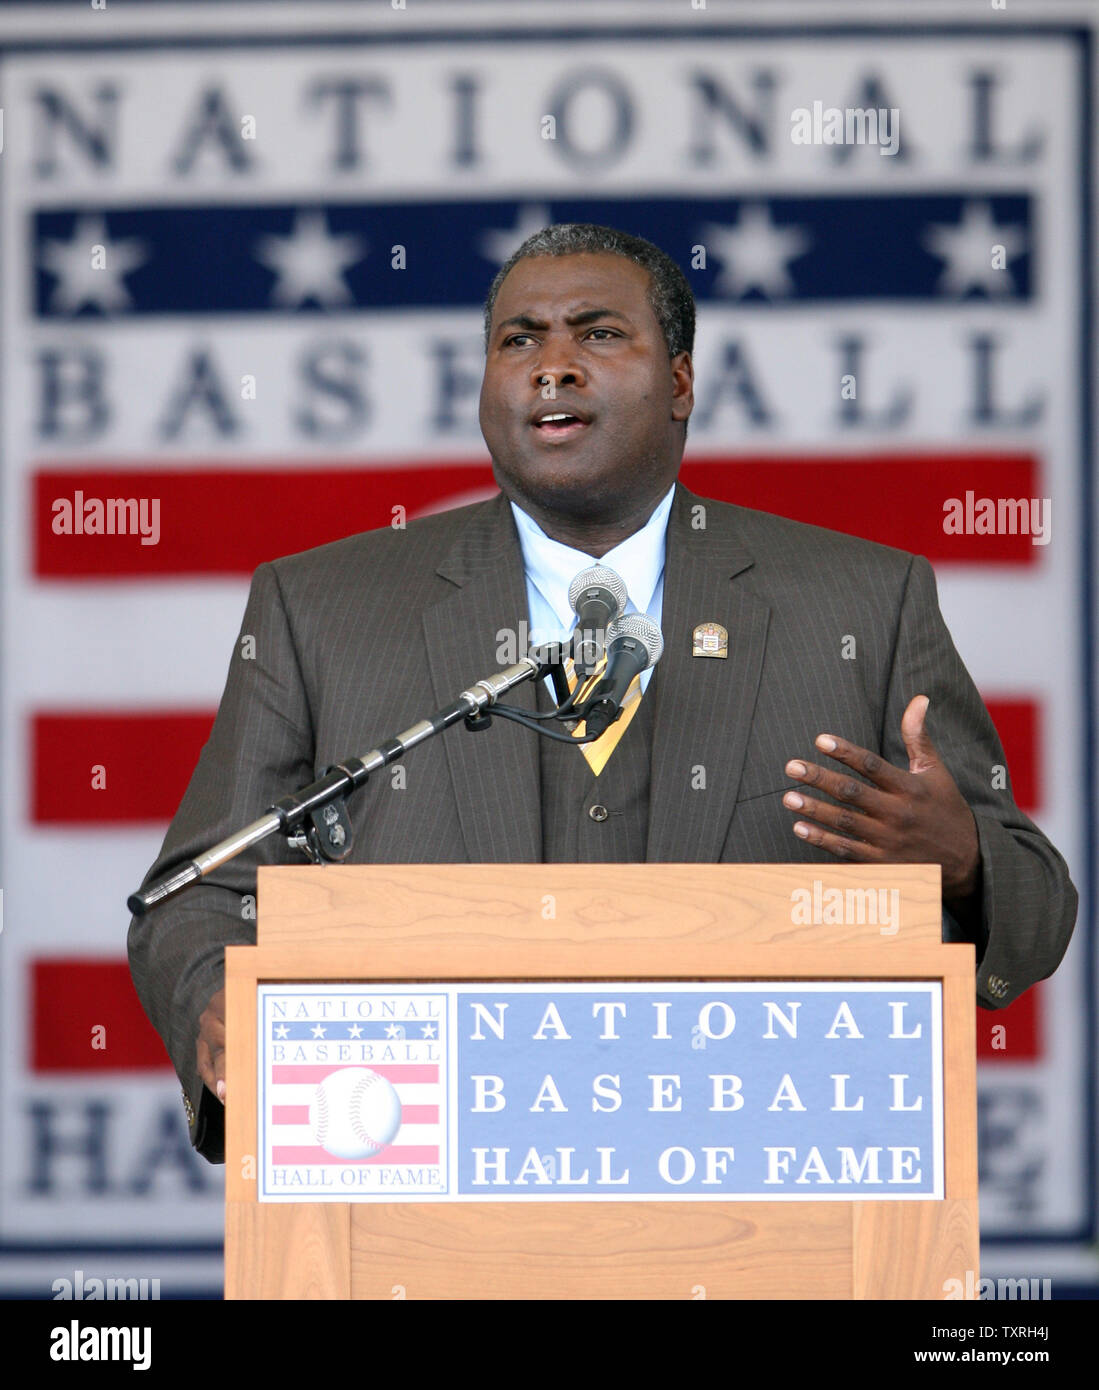 Alicia Gwynn, wife of National Baseball Hall of Fame inductee Tony Gwynn,  smiles as her husband delivers his induction speech in Cooperstown, N.Y.,  Sunday, July 29, 2007. Gwynn spent his Major League